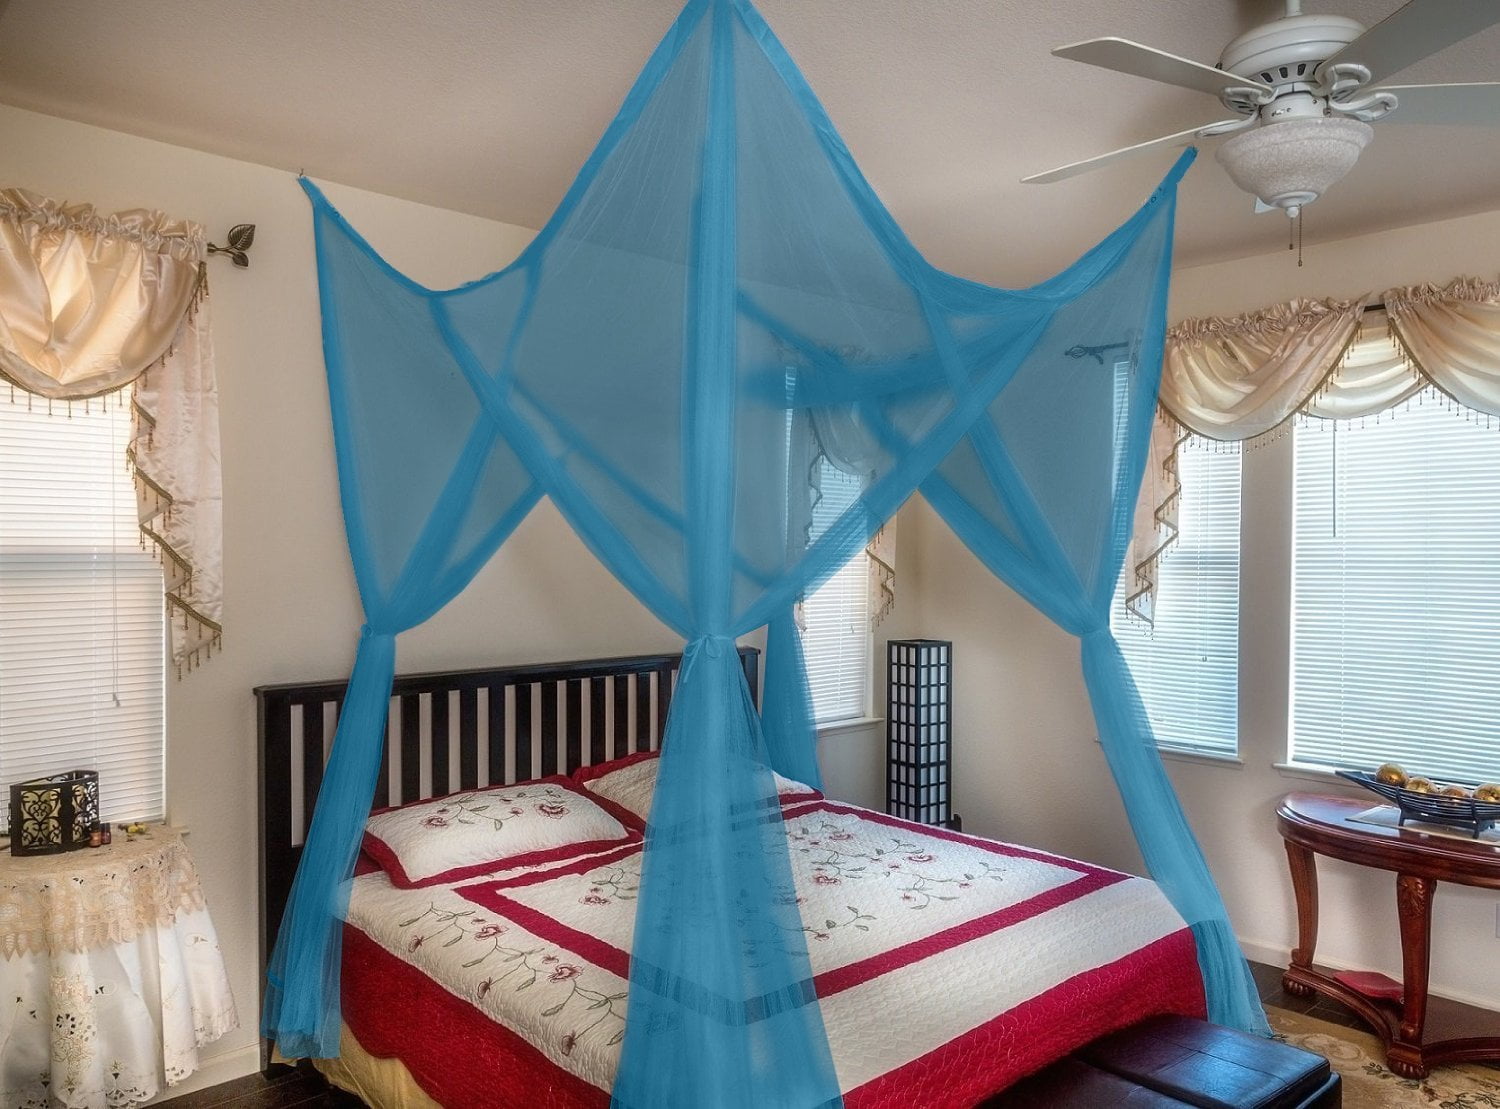 OctoRose Four-Poster or Ceiling Mount Large Bedroom Airy Mosquito Net Bed Canopy 